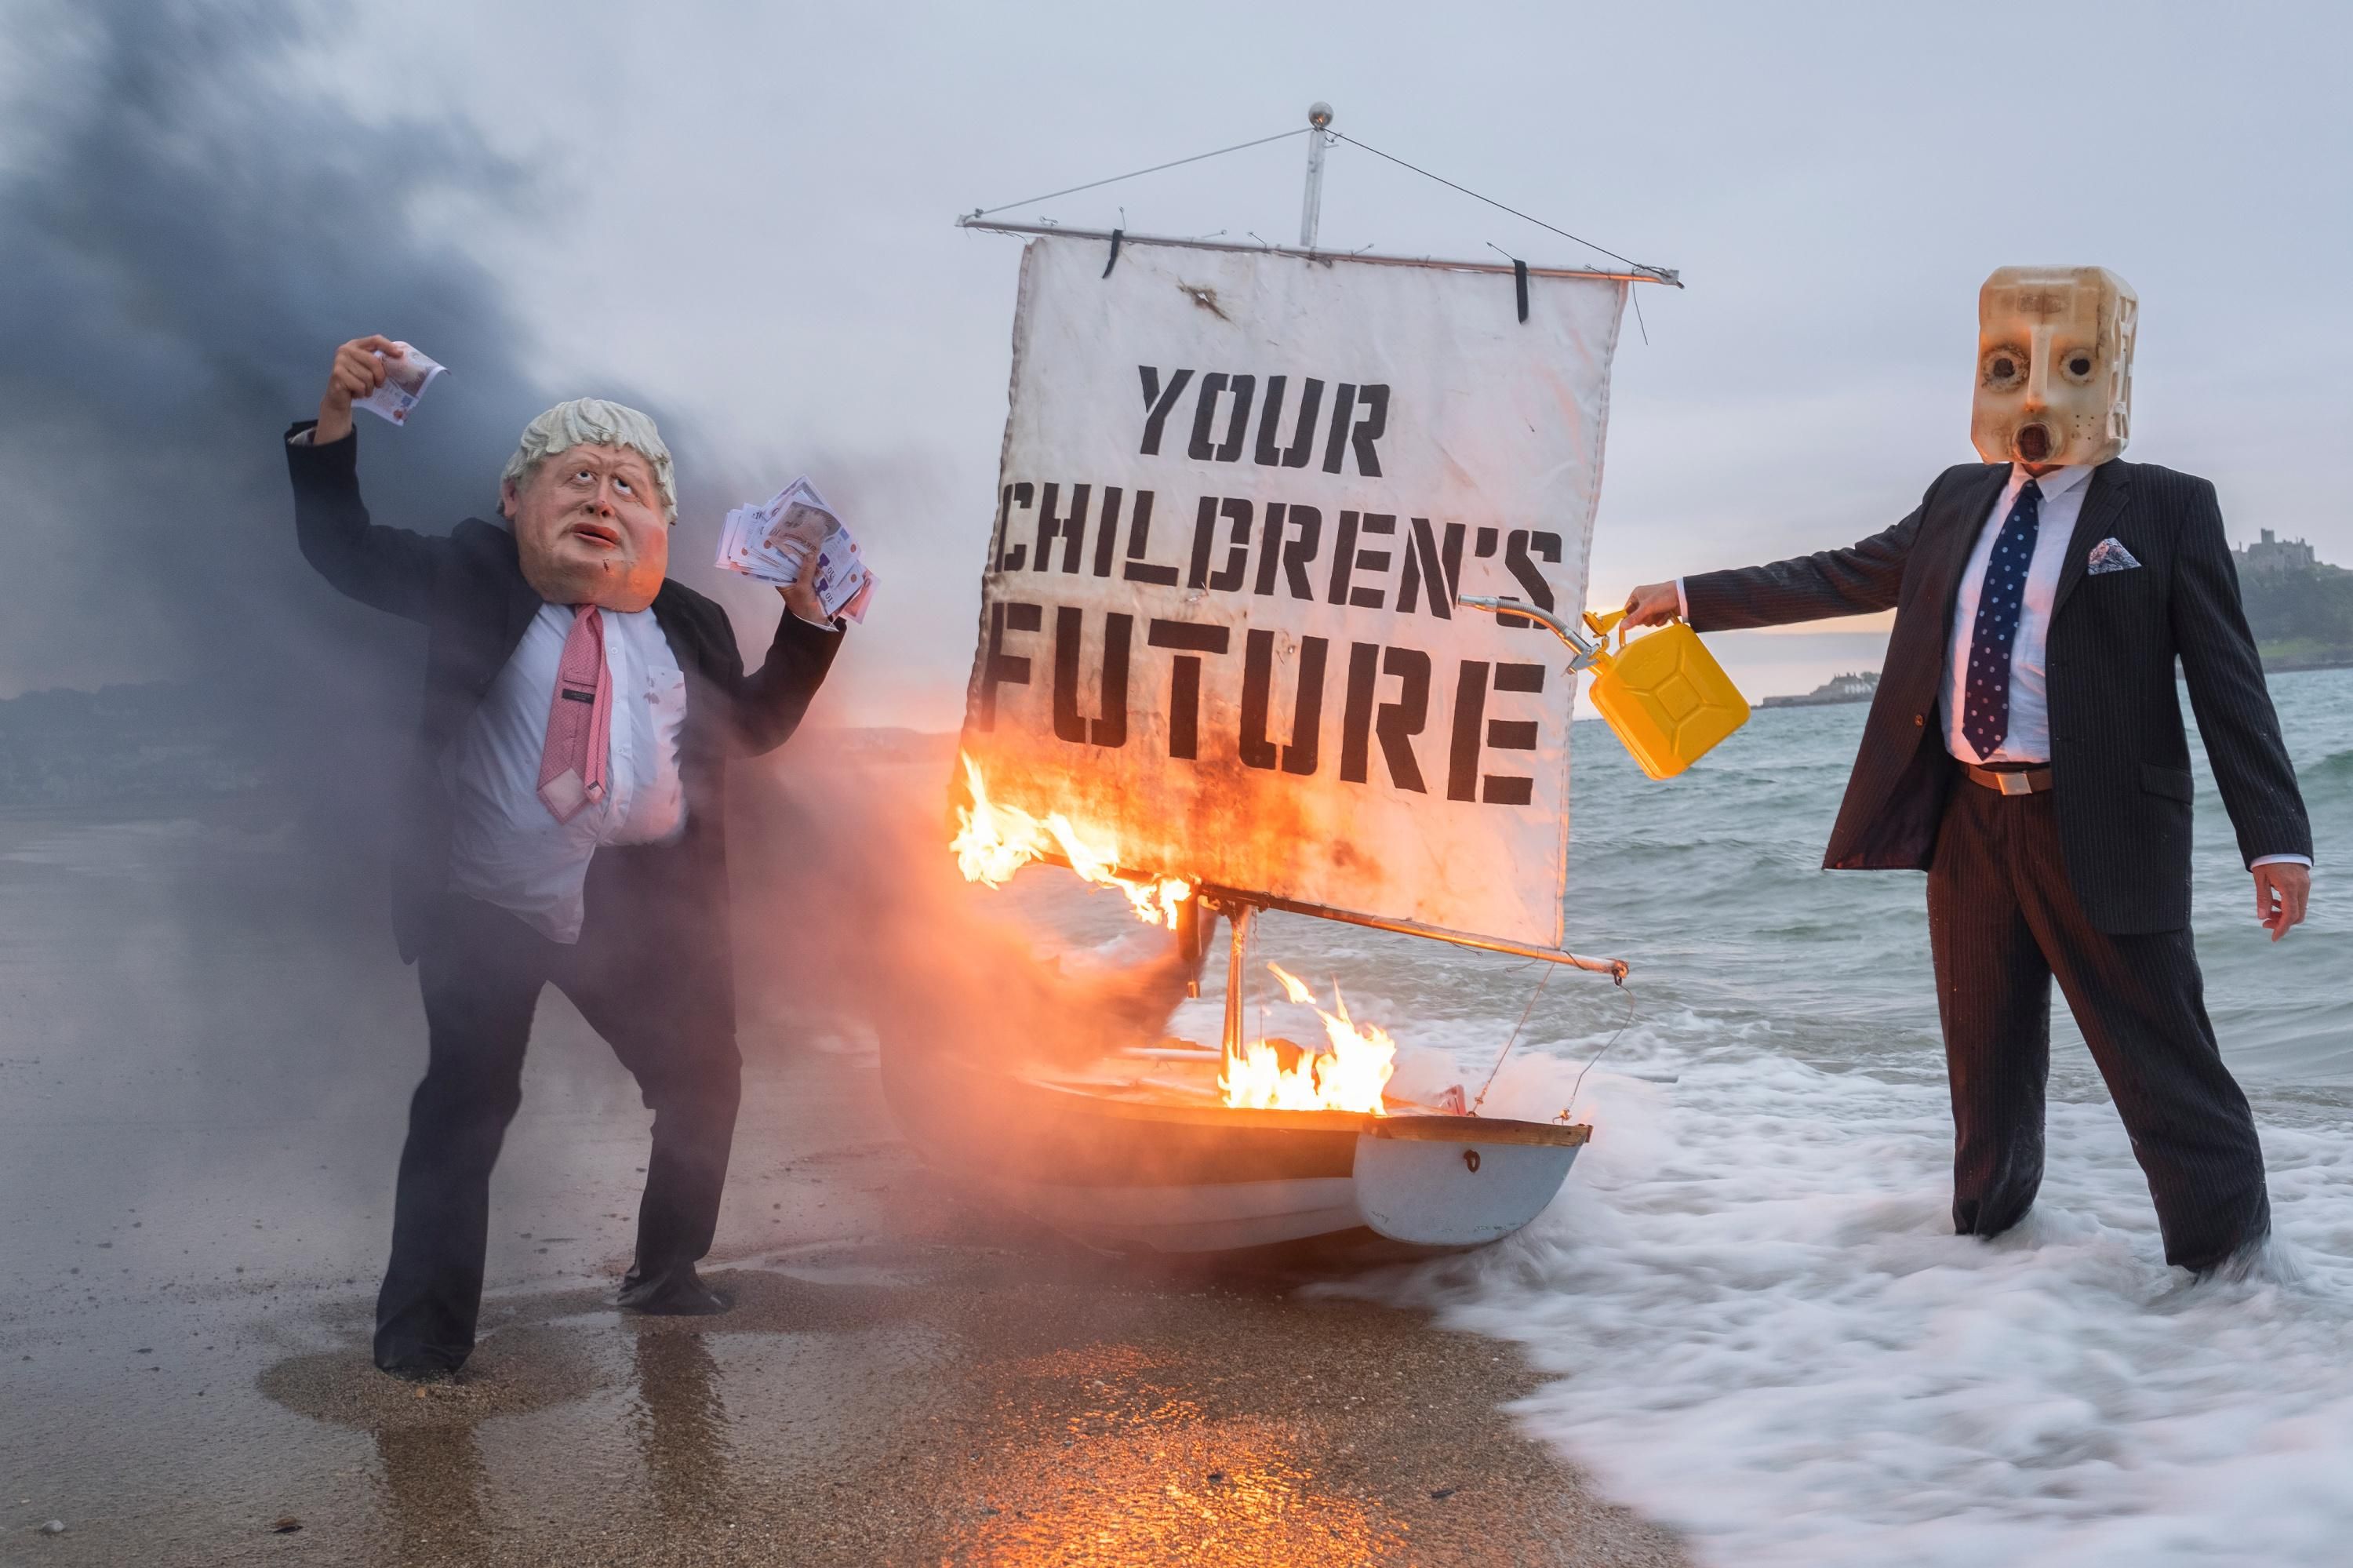 Ocean Rebellion staged a theatrical action with a Boris Johnson head and an "Oil head" burning a boat on Marazion beach on June 5, 2021 in Cornwall, United Kingdom.(Photo: Gav Goulder/In Pictures via Getty Images)